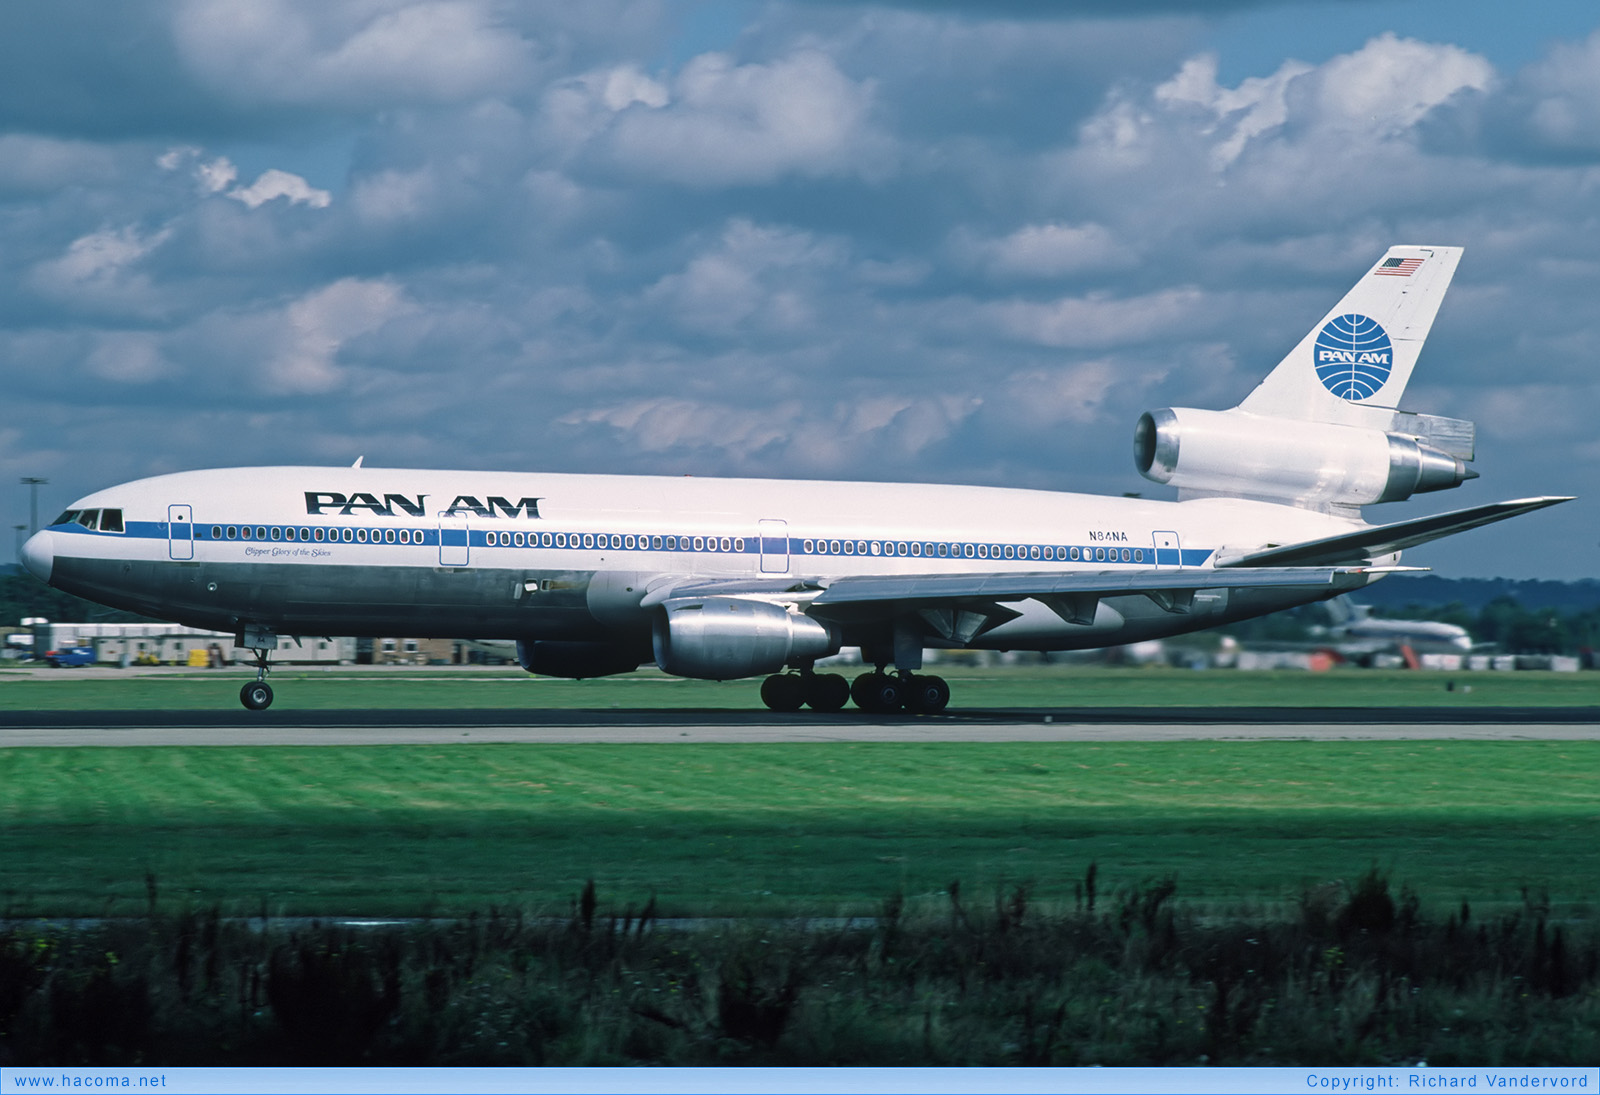 Photo of N84NA - Pan Am Clipper Glory of the Skies - Gatwick Airport - Sep 1982